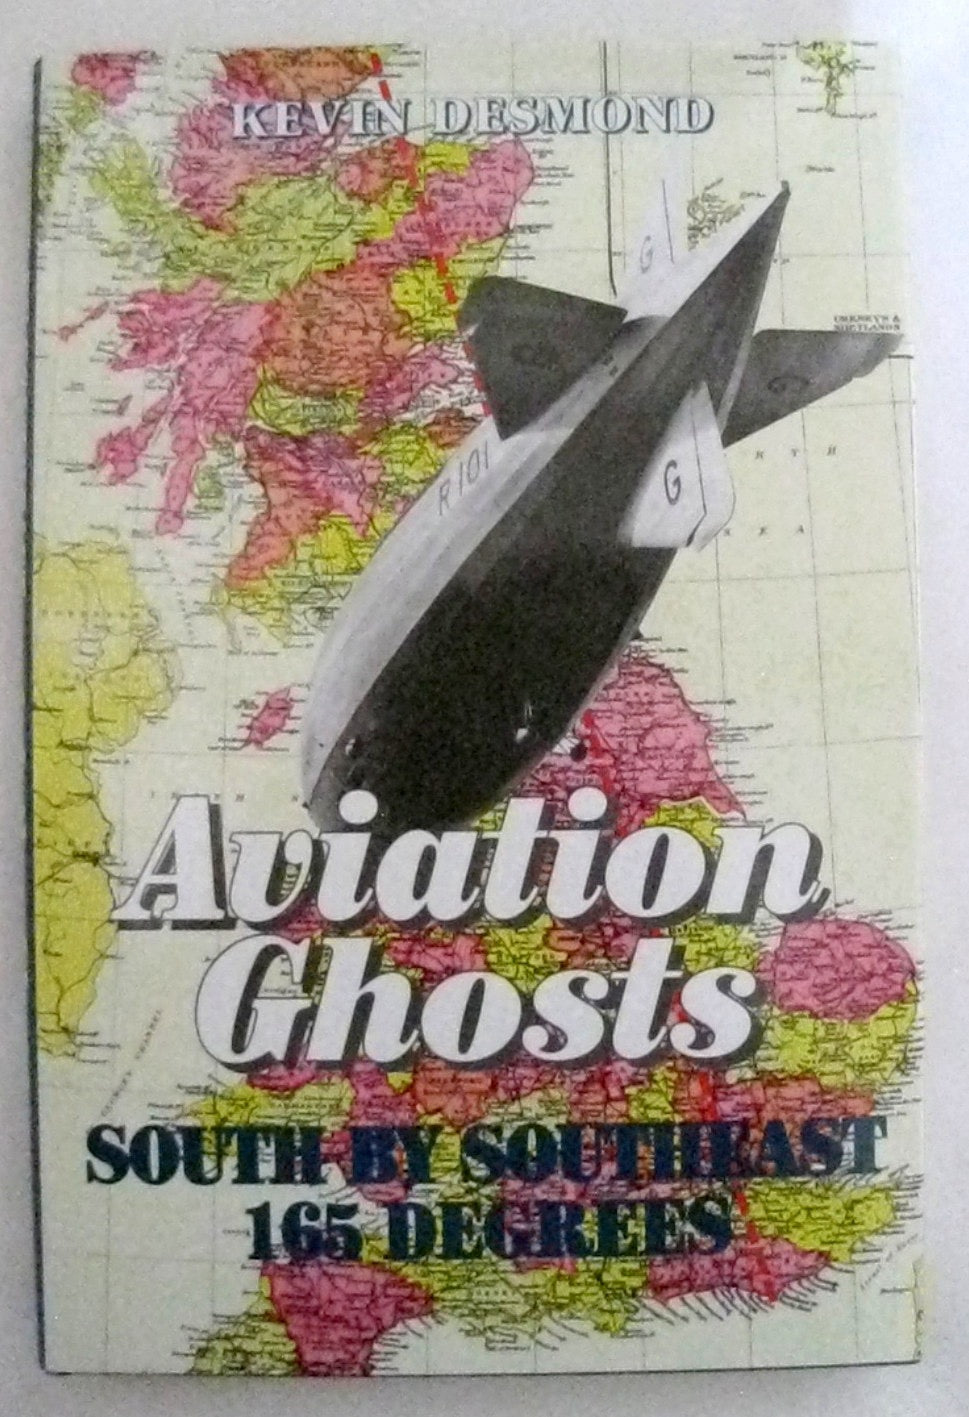 Aviation Ghosts South by SouthEast 165 Degrees By Kevin Desmond